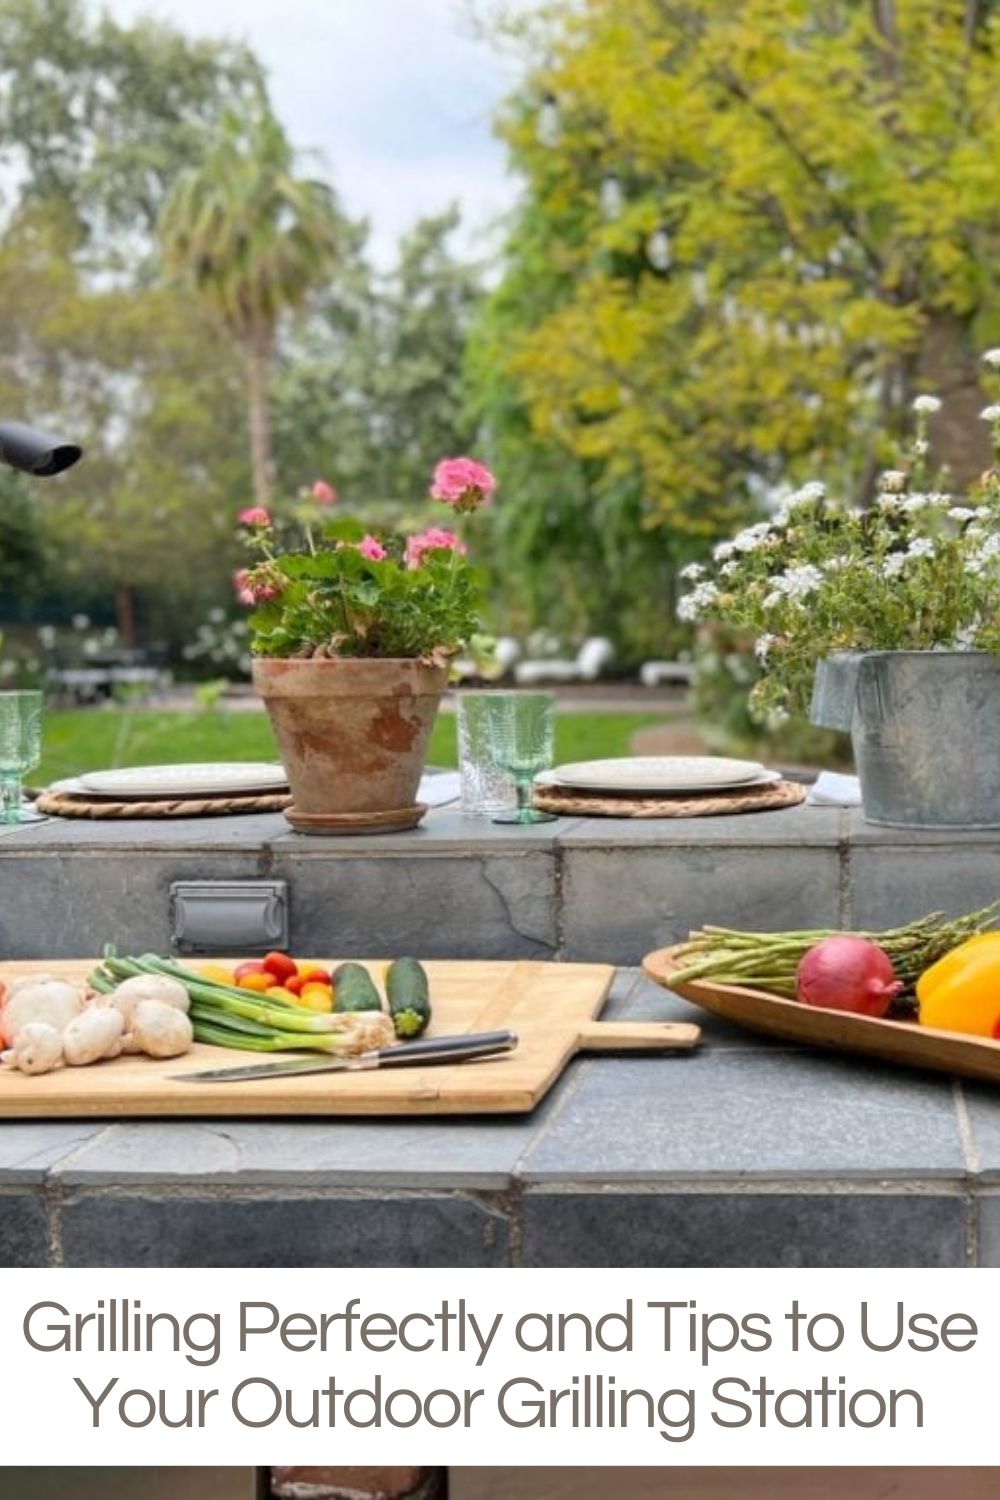 Time to fire up the grill and embark on a flavor-filled journey of outdoor cooking! It's time to have fun with your outdoor grilling station.